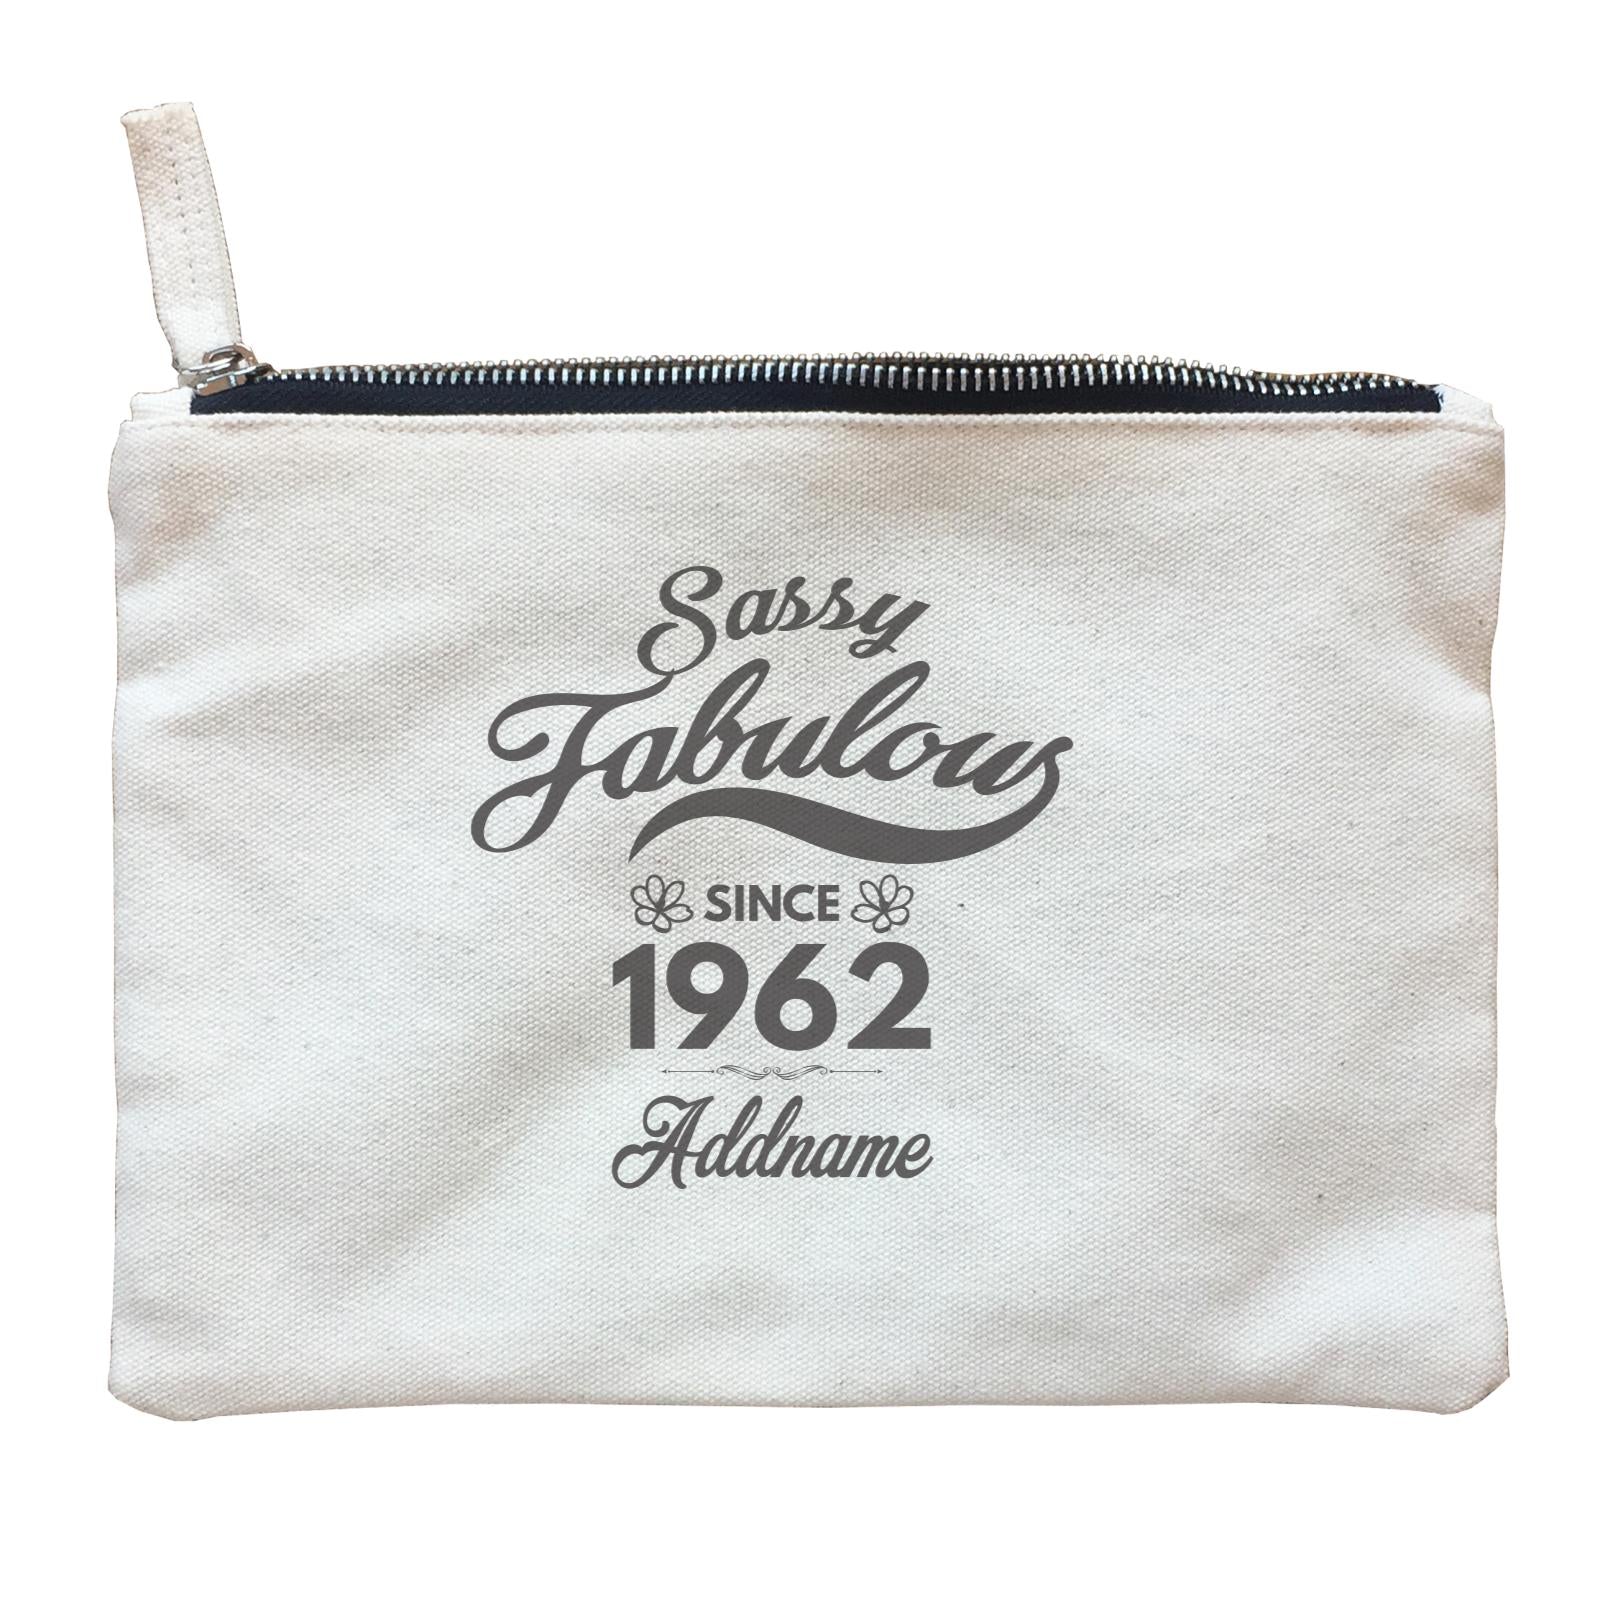 Personalize It Birthyear Sassy Fabulous Since with Addname and Add Year Zipper Pouch